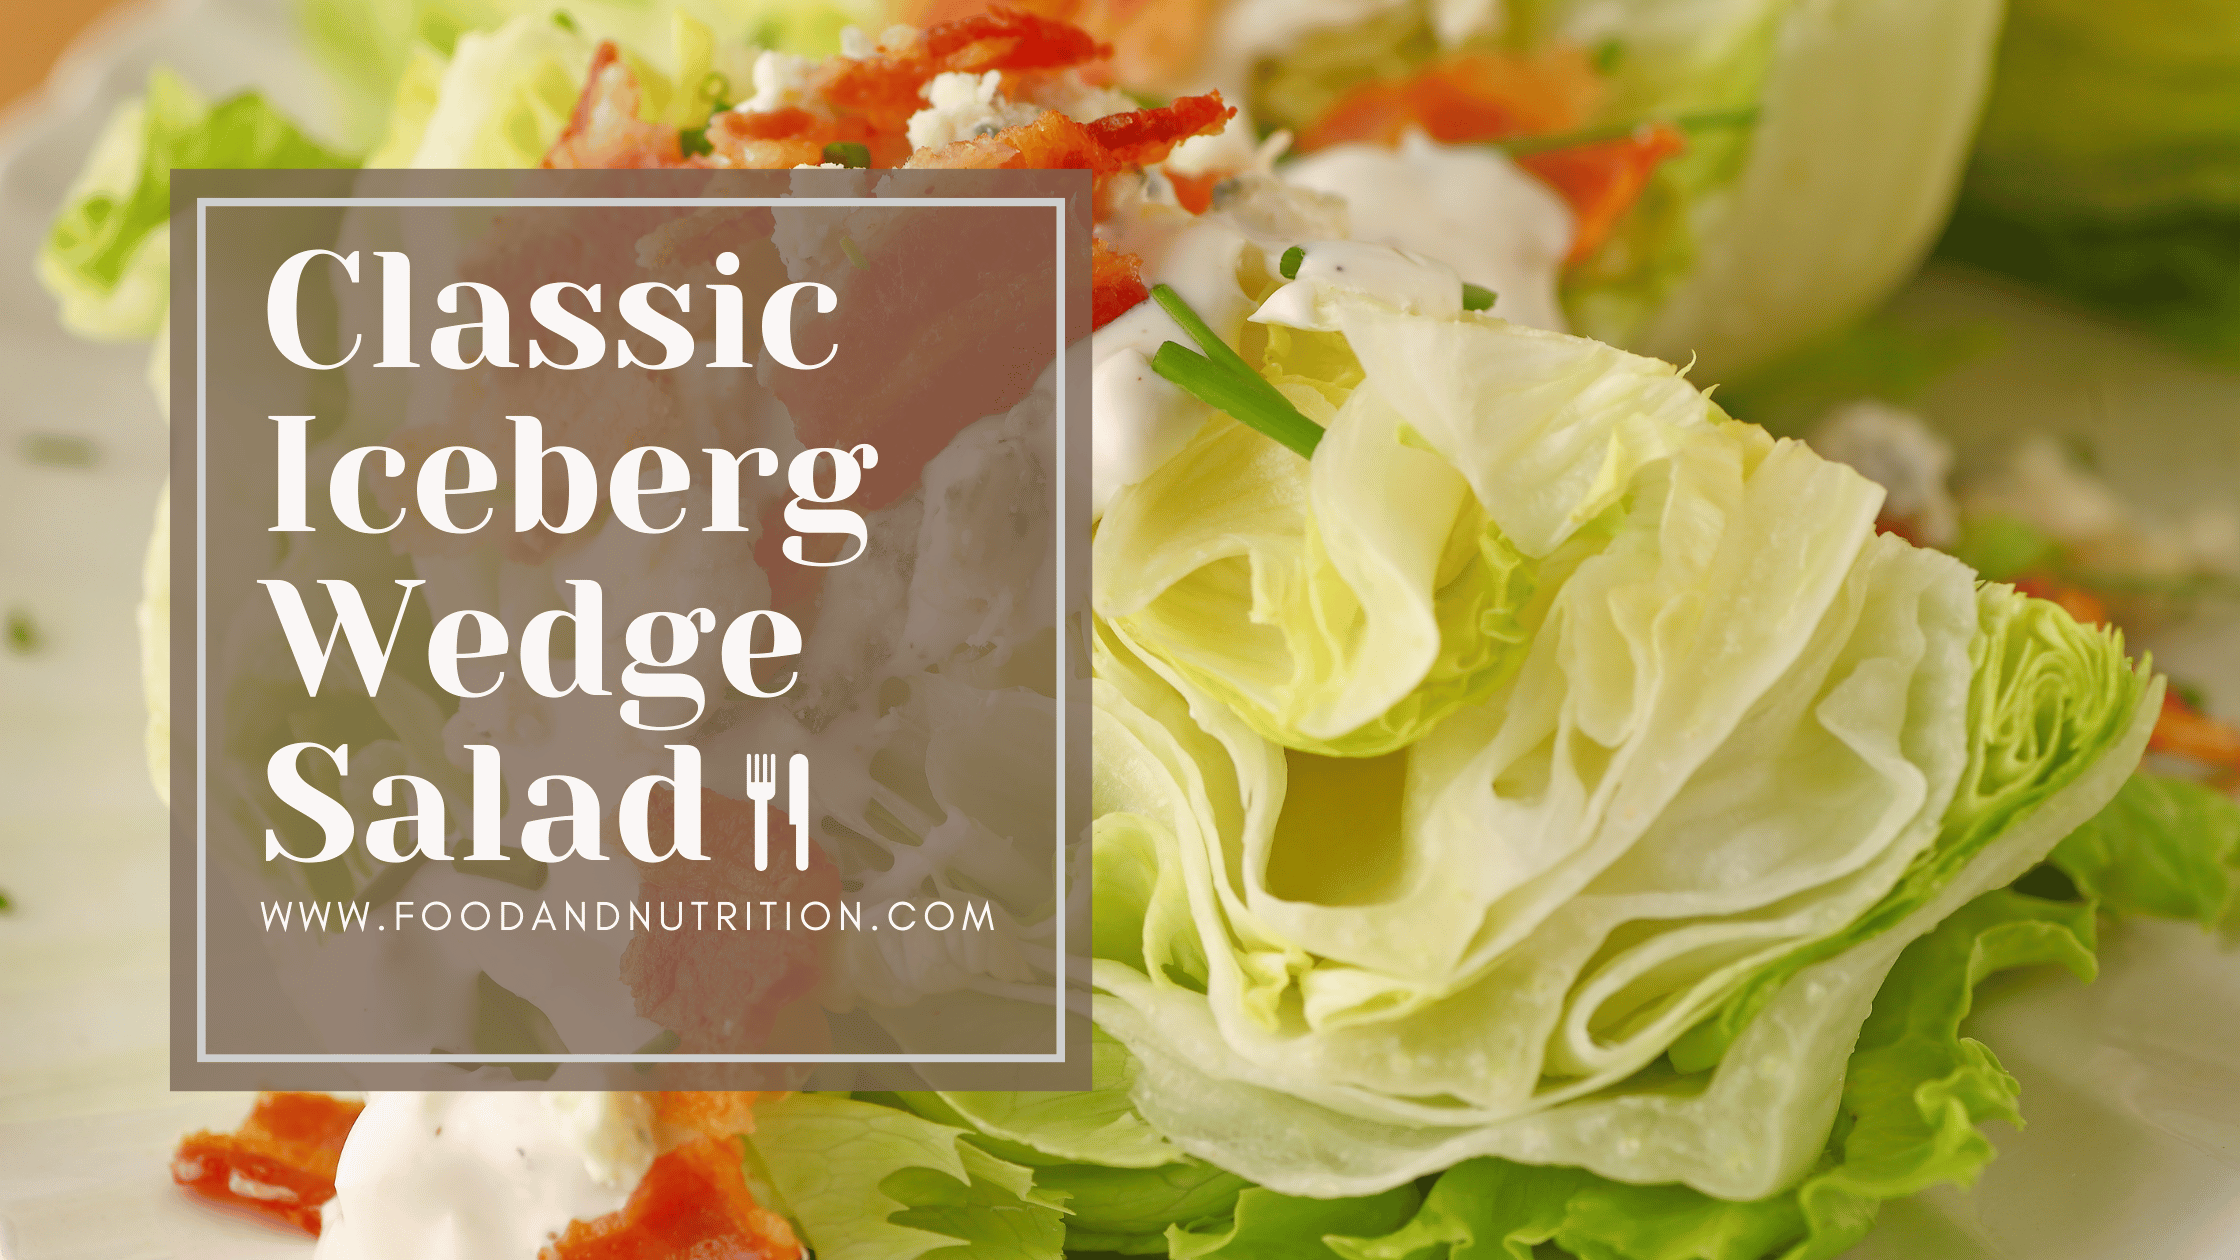 The Classic Iceberg Wedge Salad: A Tale of Timeless Flavors and Pleasing Textures